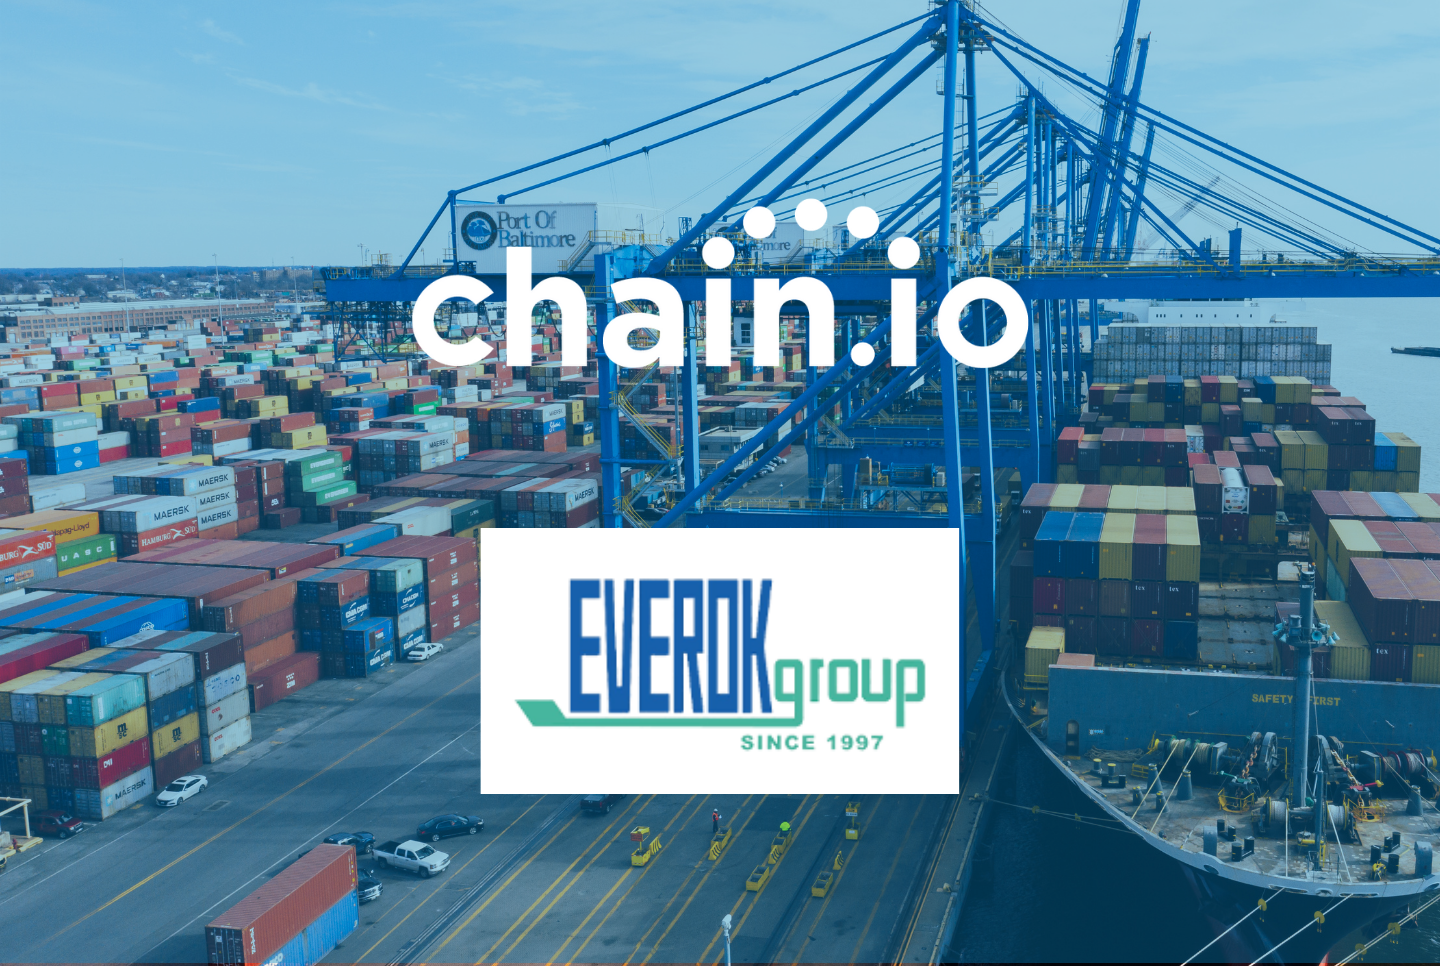 Everok Group, a leading Asia based freight forwarder, has selected the Chain.io full service integration platform to power their global network integration.